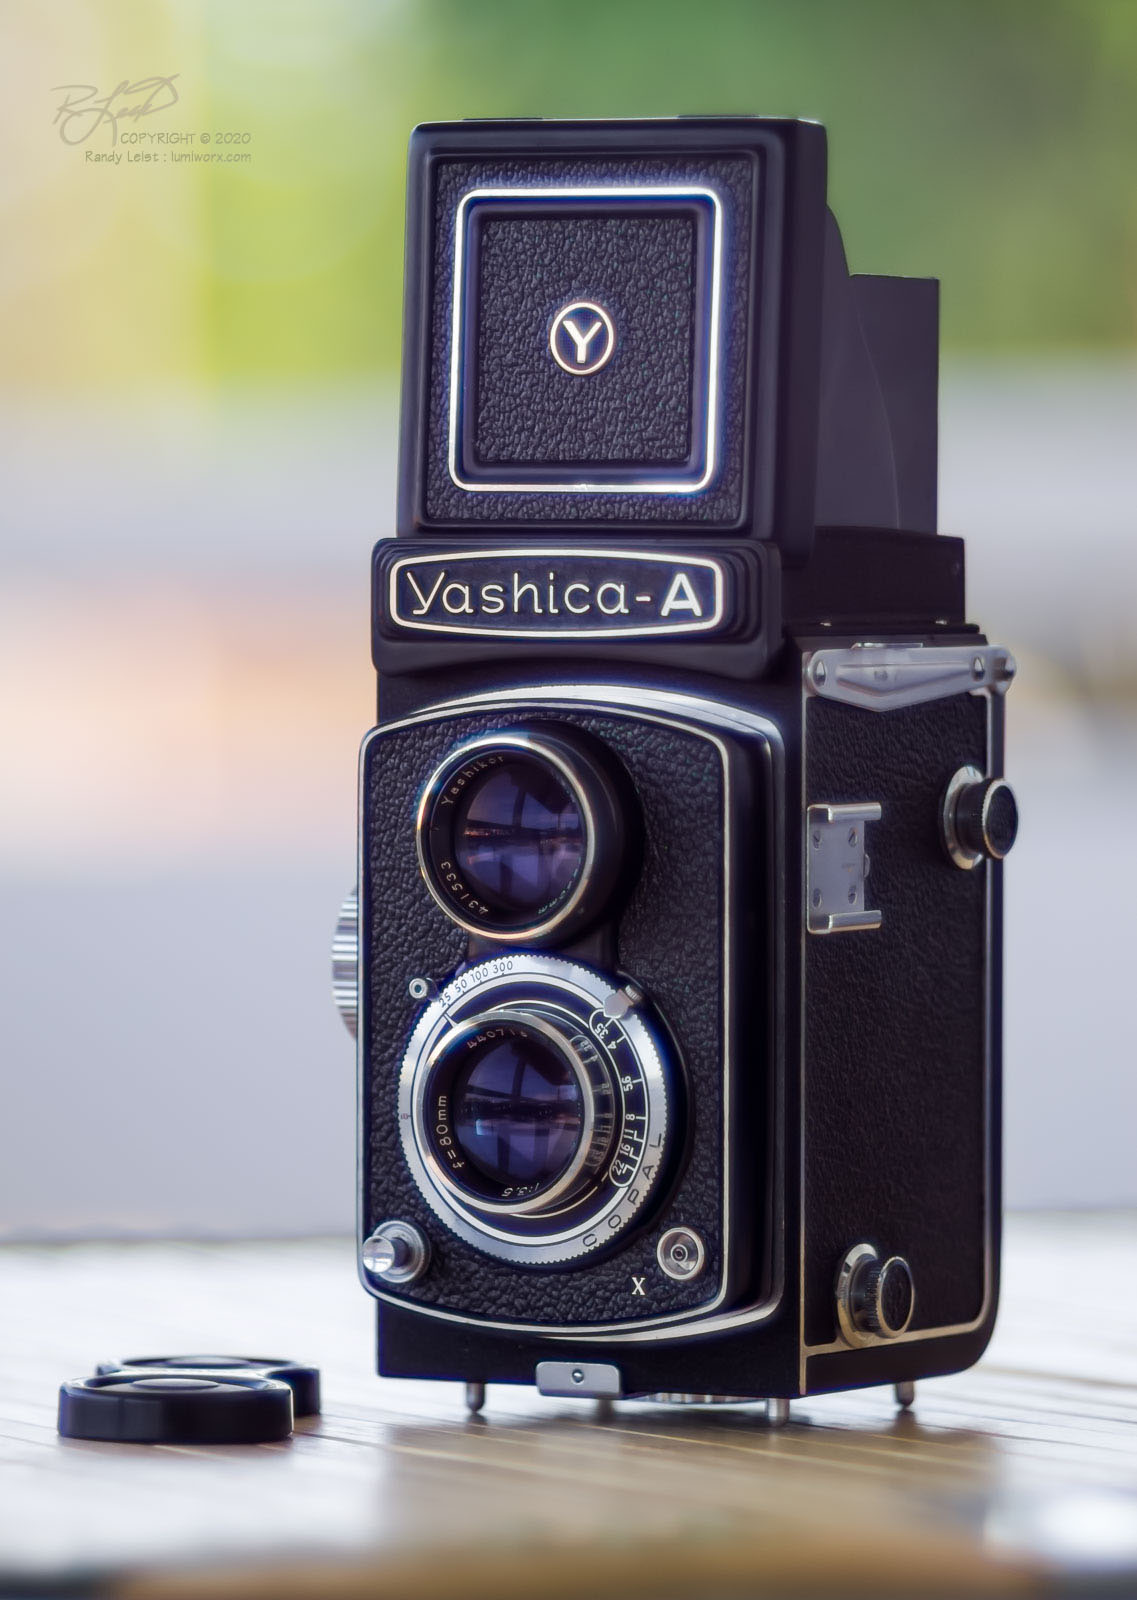 The last model of the Yashica-A TLR - approx., 1969